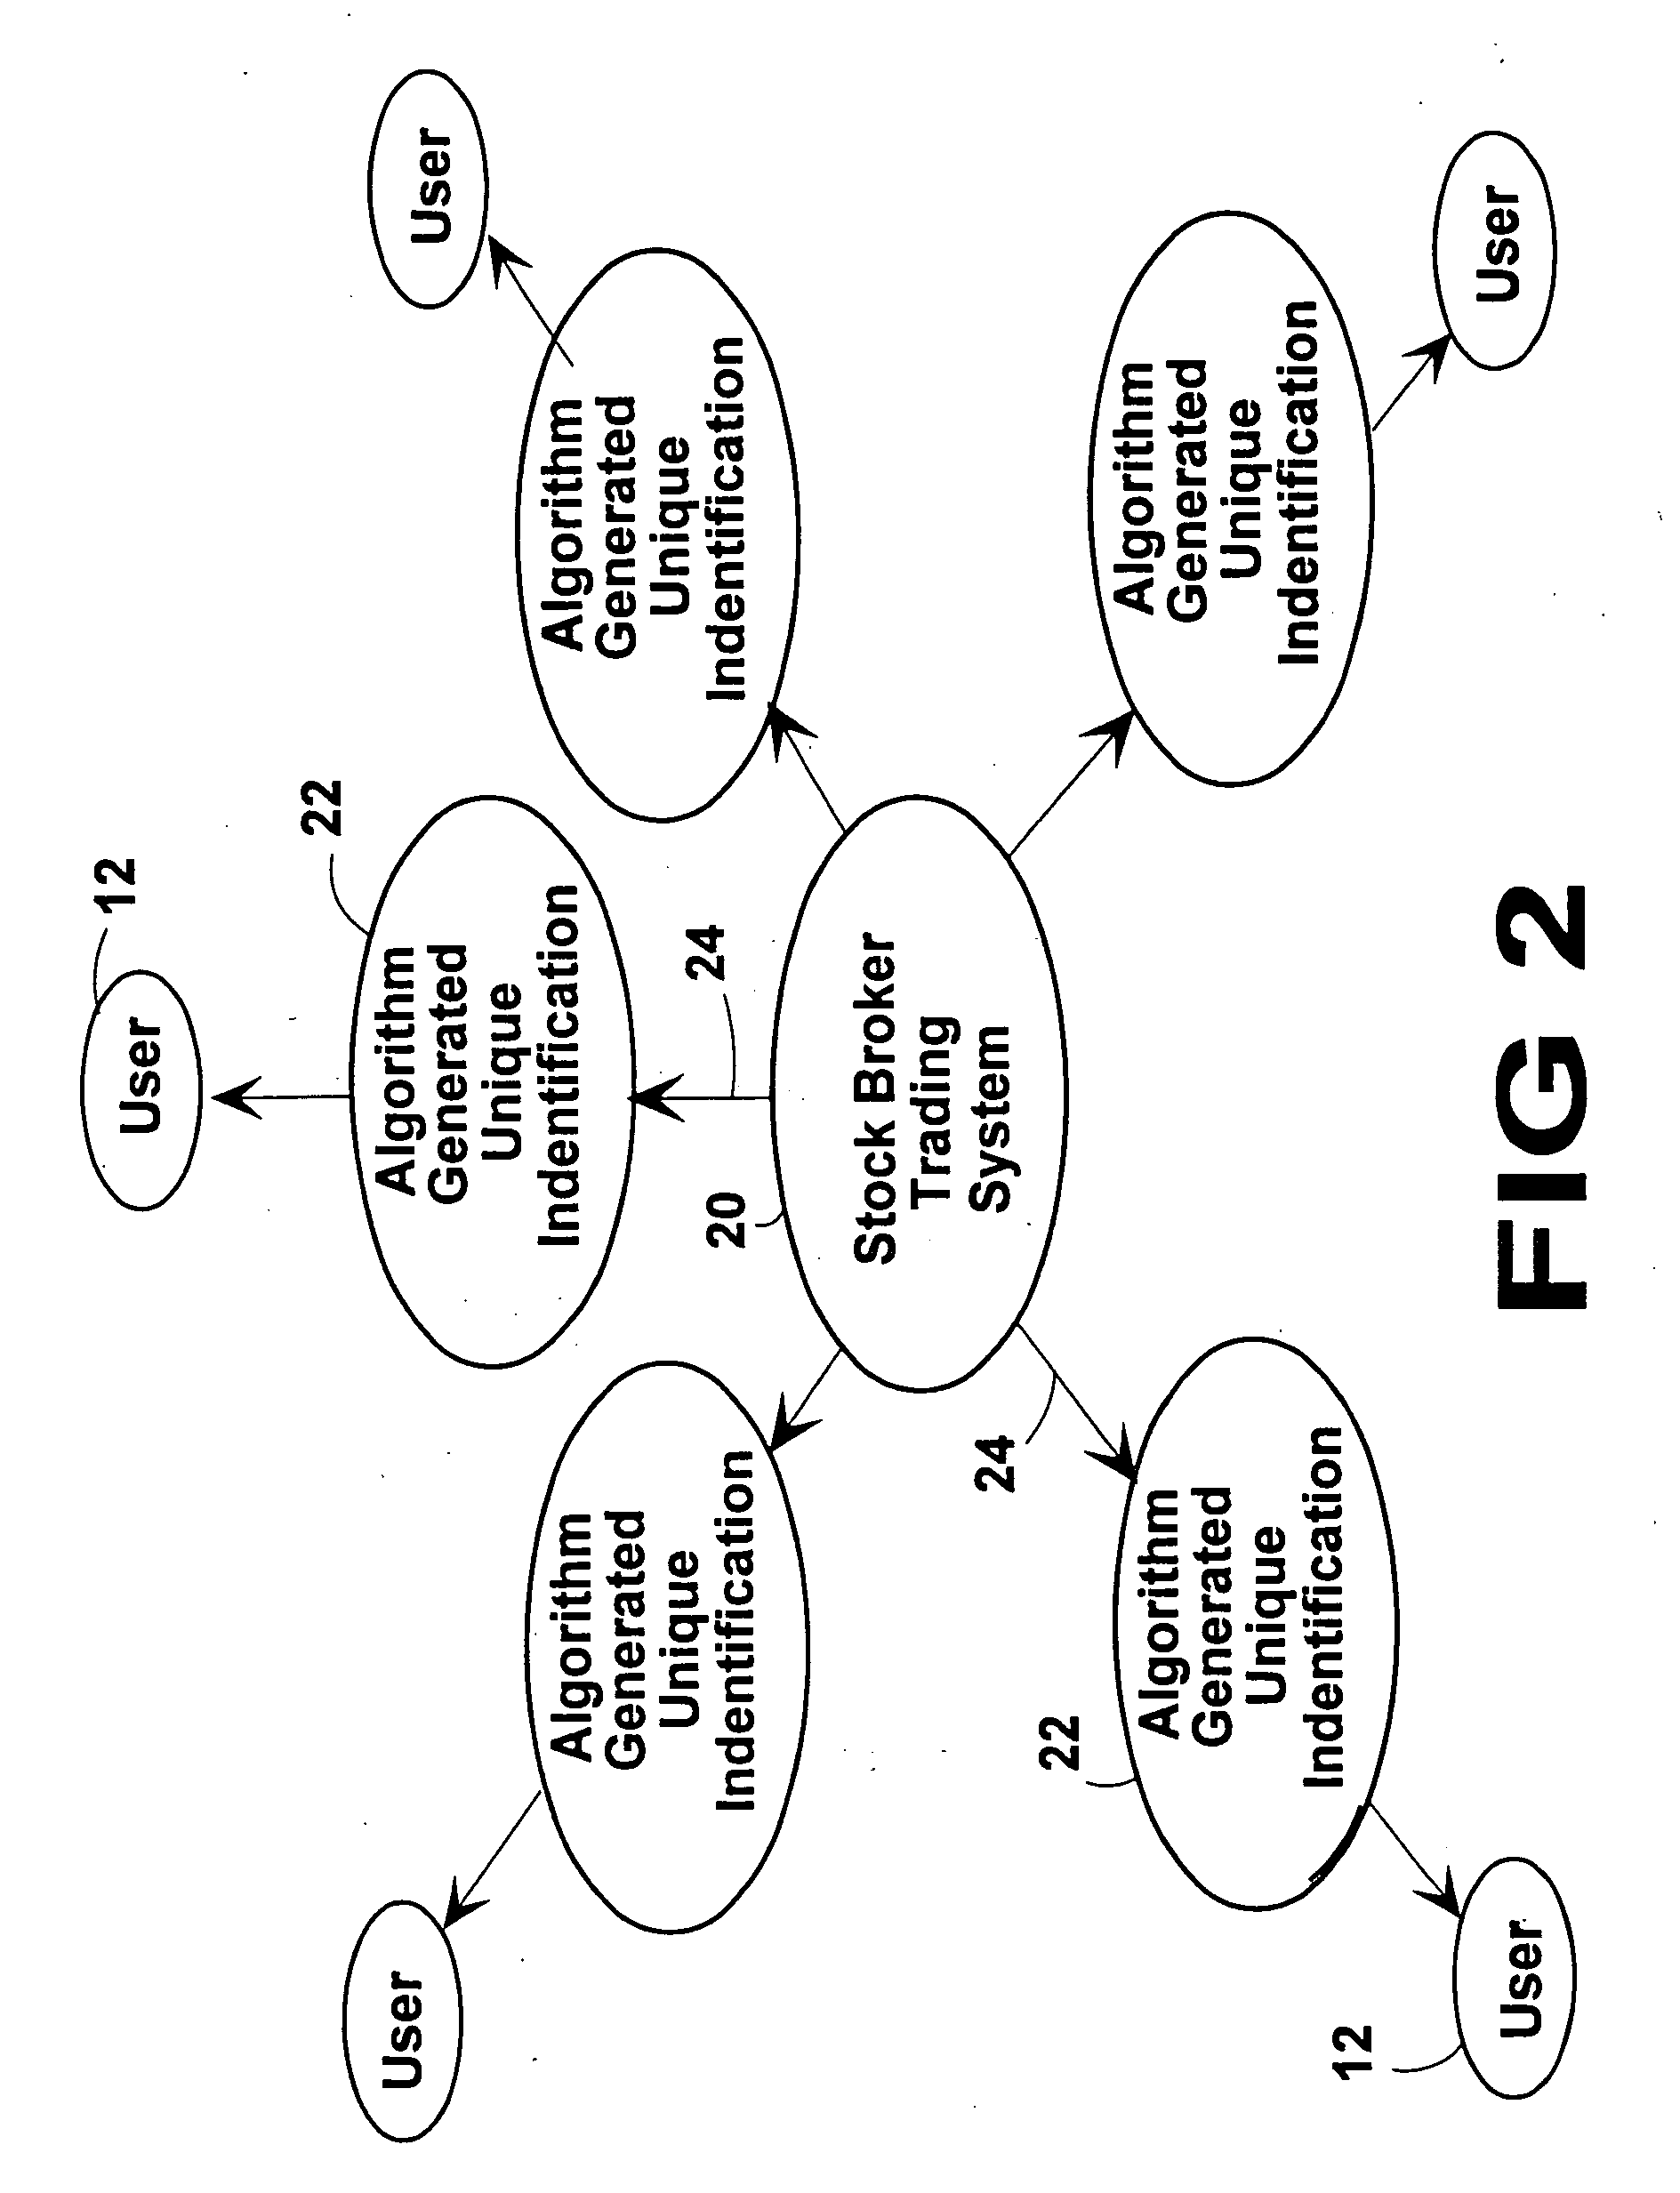 Hypertext transfer protocol application programming interface between cleint-side trading systems and server-side stock trading systems